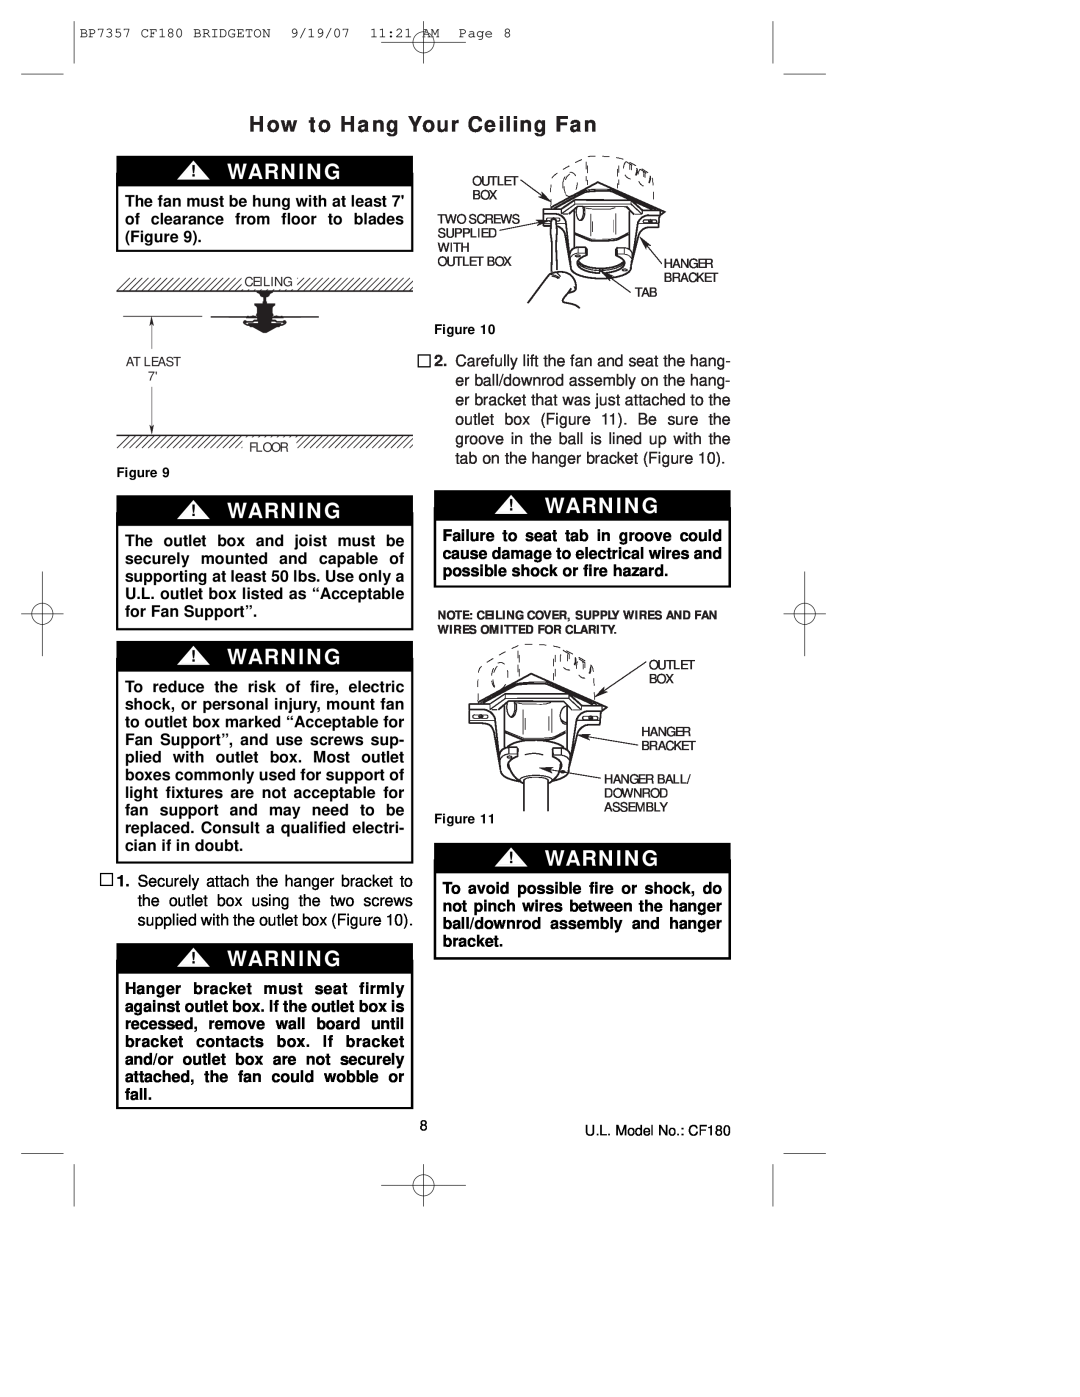 Emerson CF180AP00 owner manual How to Hang Your Ceiling Fan 